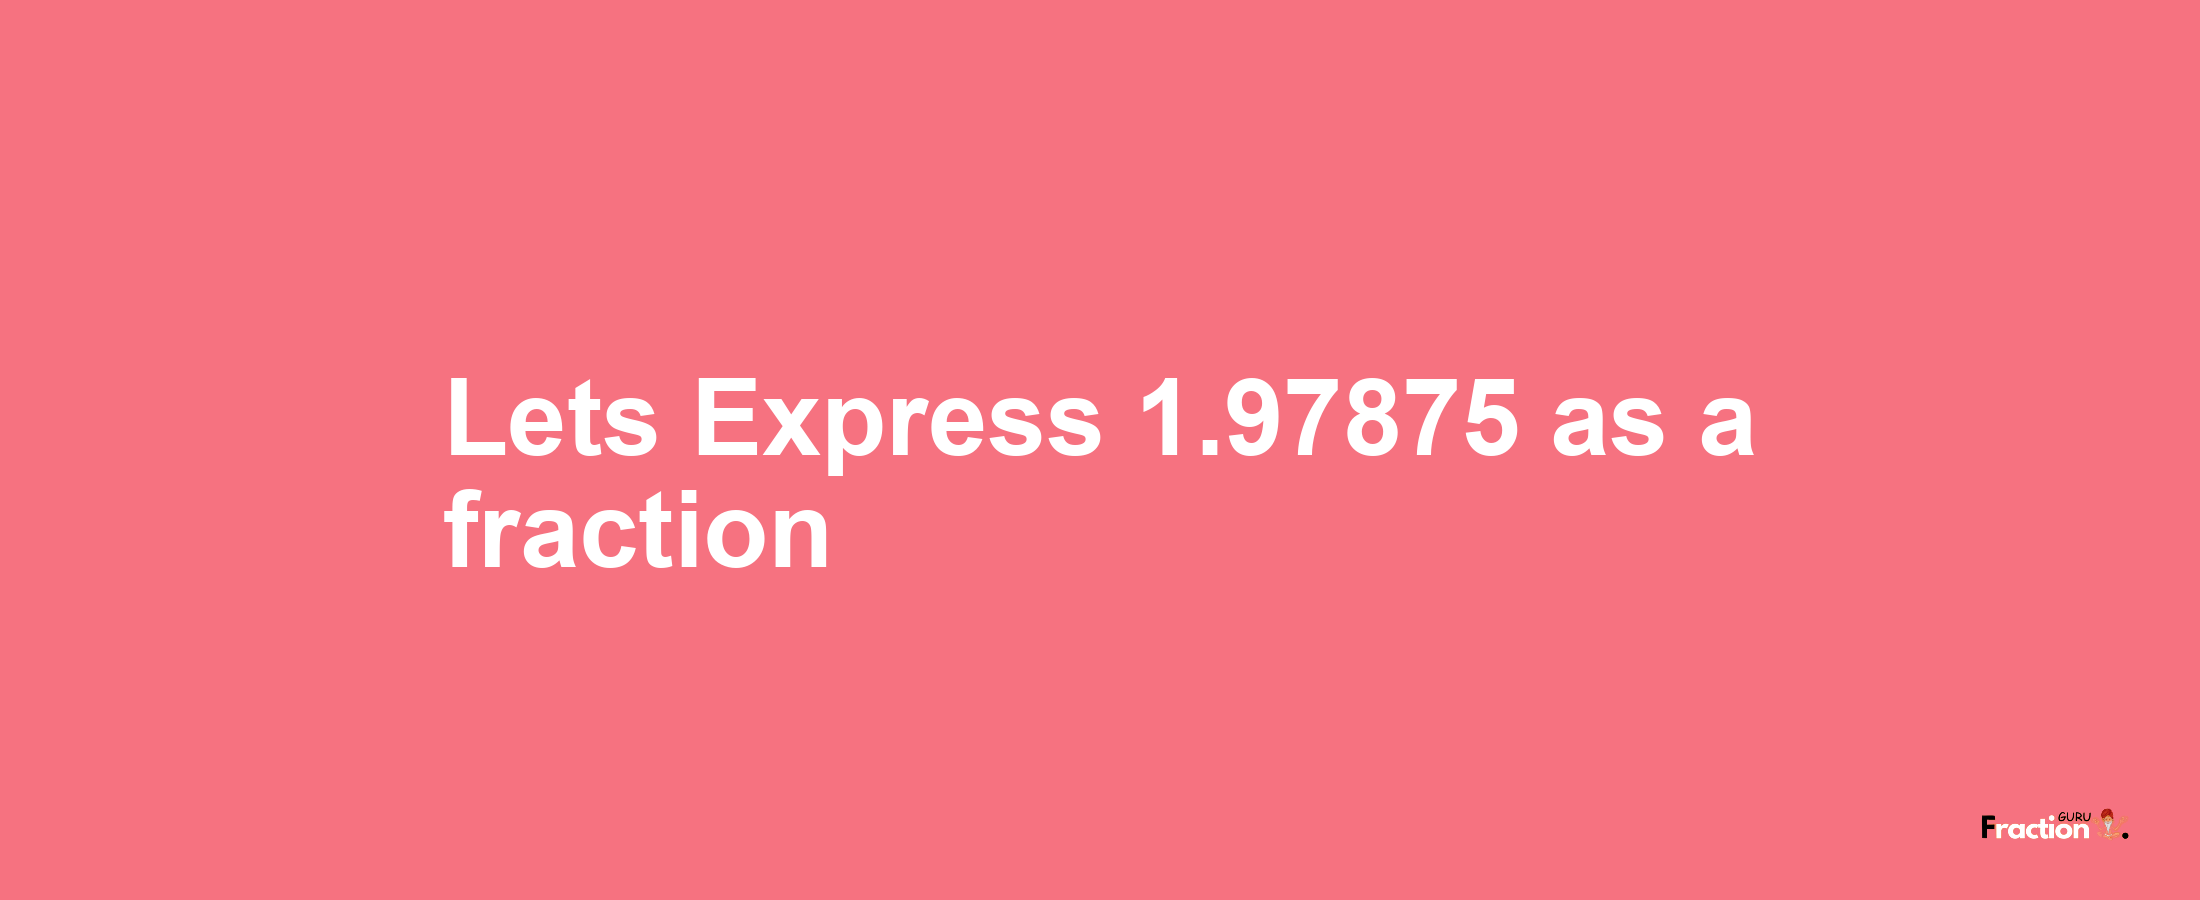 Lets Express 1.97875 as afraction